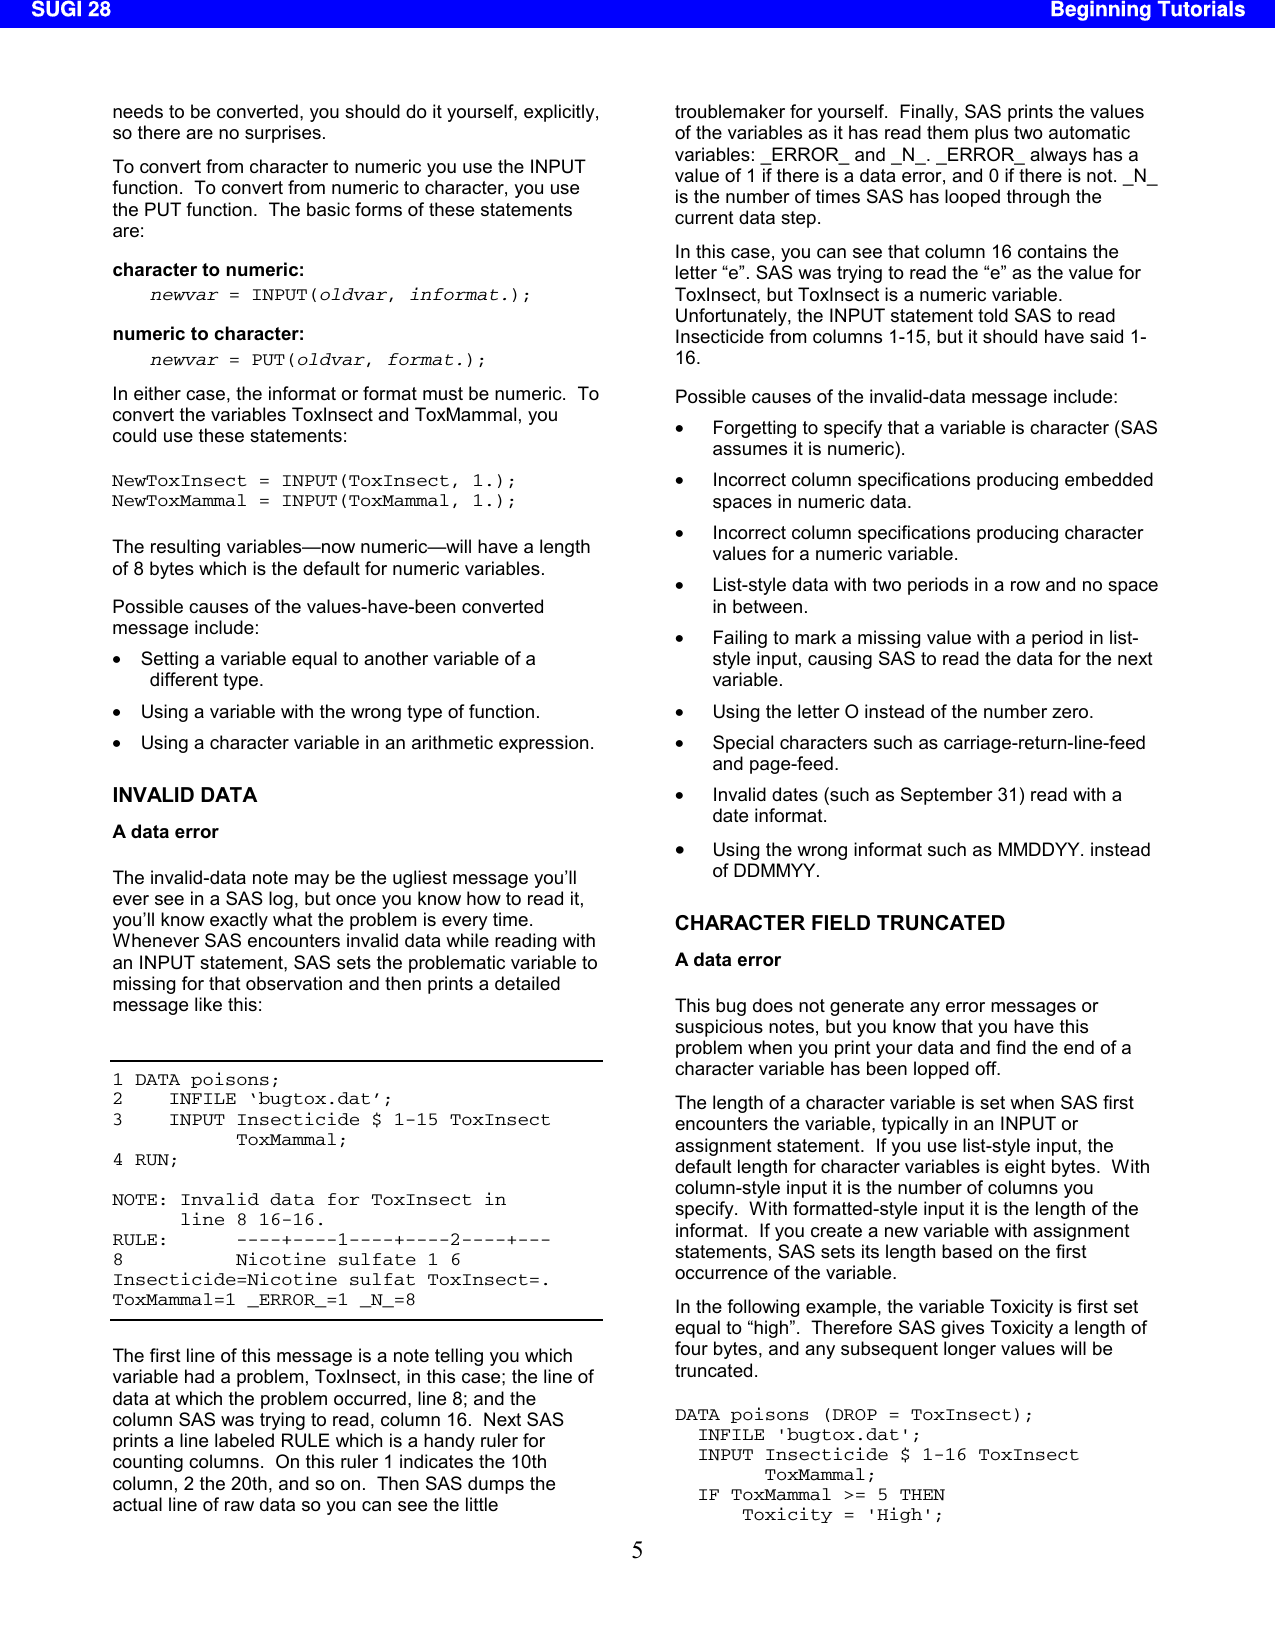 Page 5 of 10 - SUGI 28: Errors, Warnings, And Notes (Oh My): A Practical Guide To Debugging SAS(r) Programs